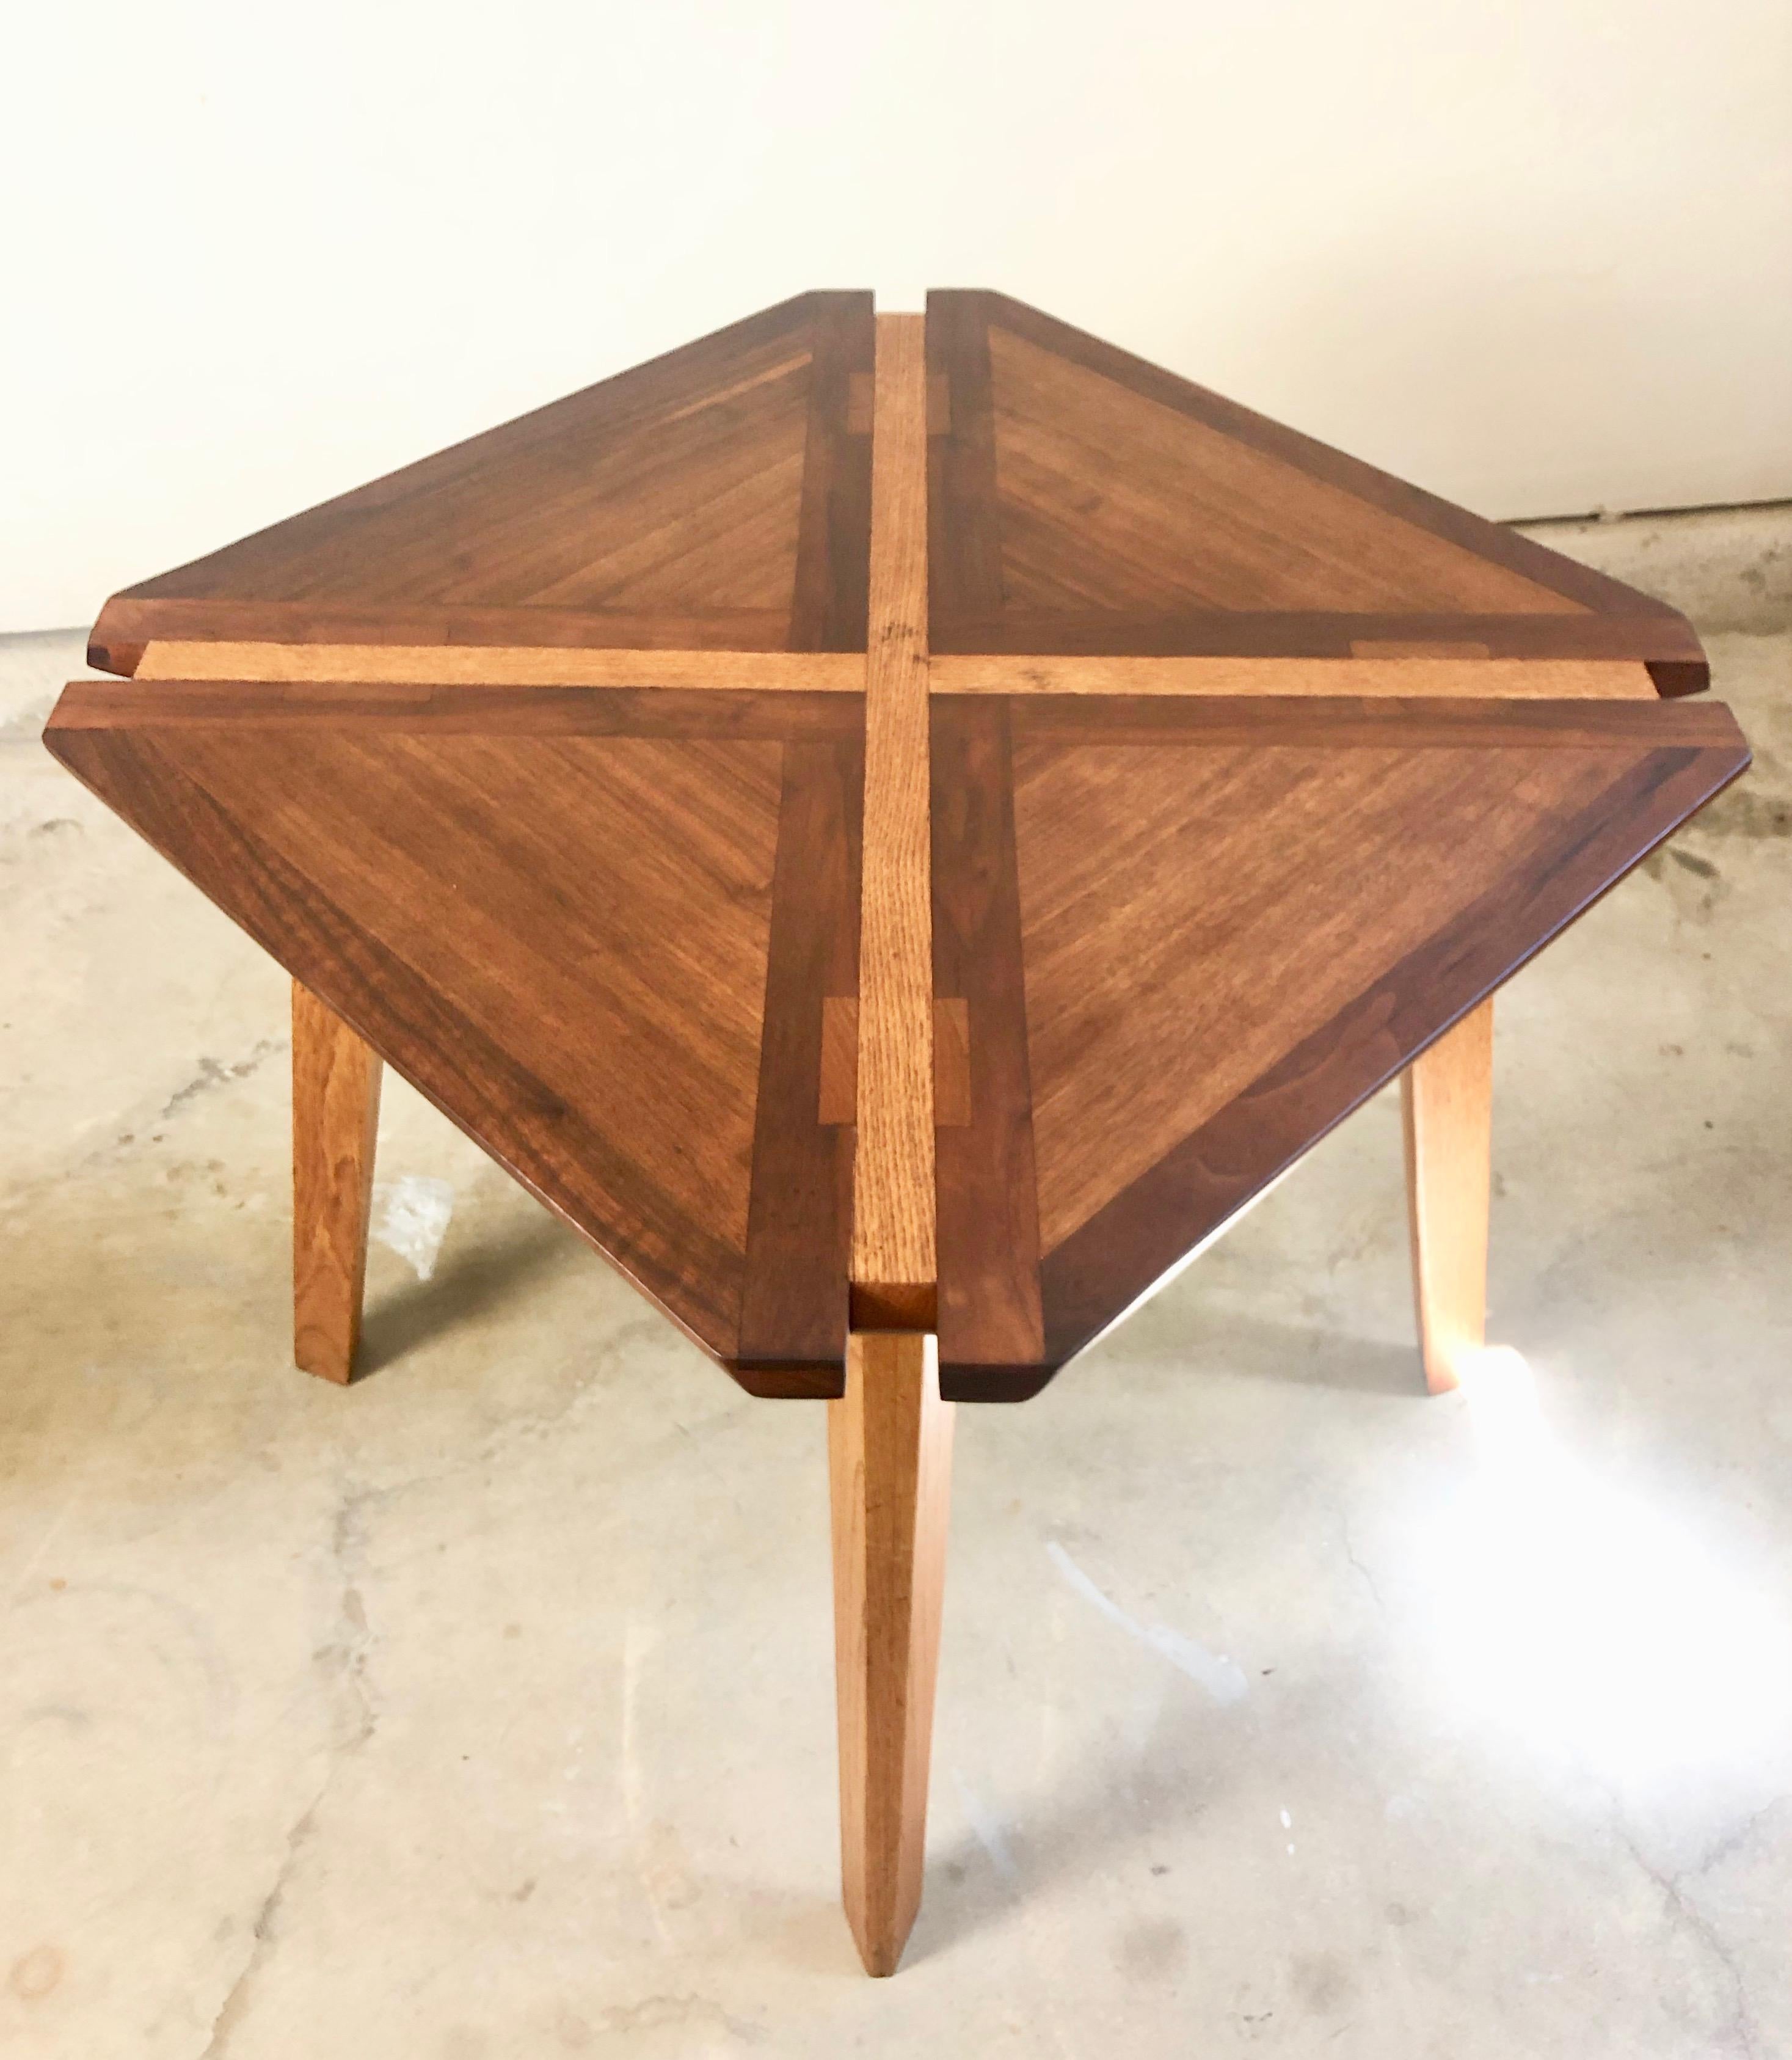 Studio Crafted Mixed Woods Dining Table / Game Table 4